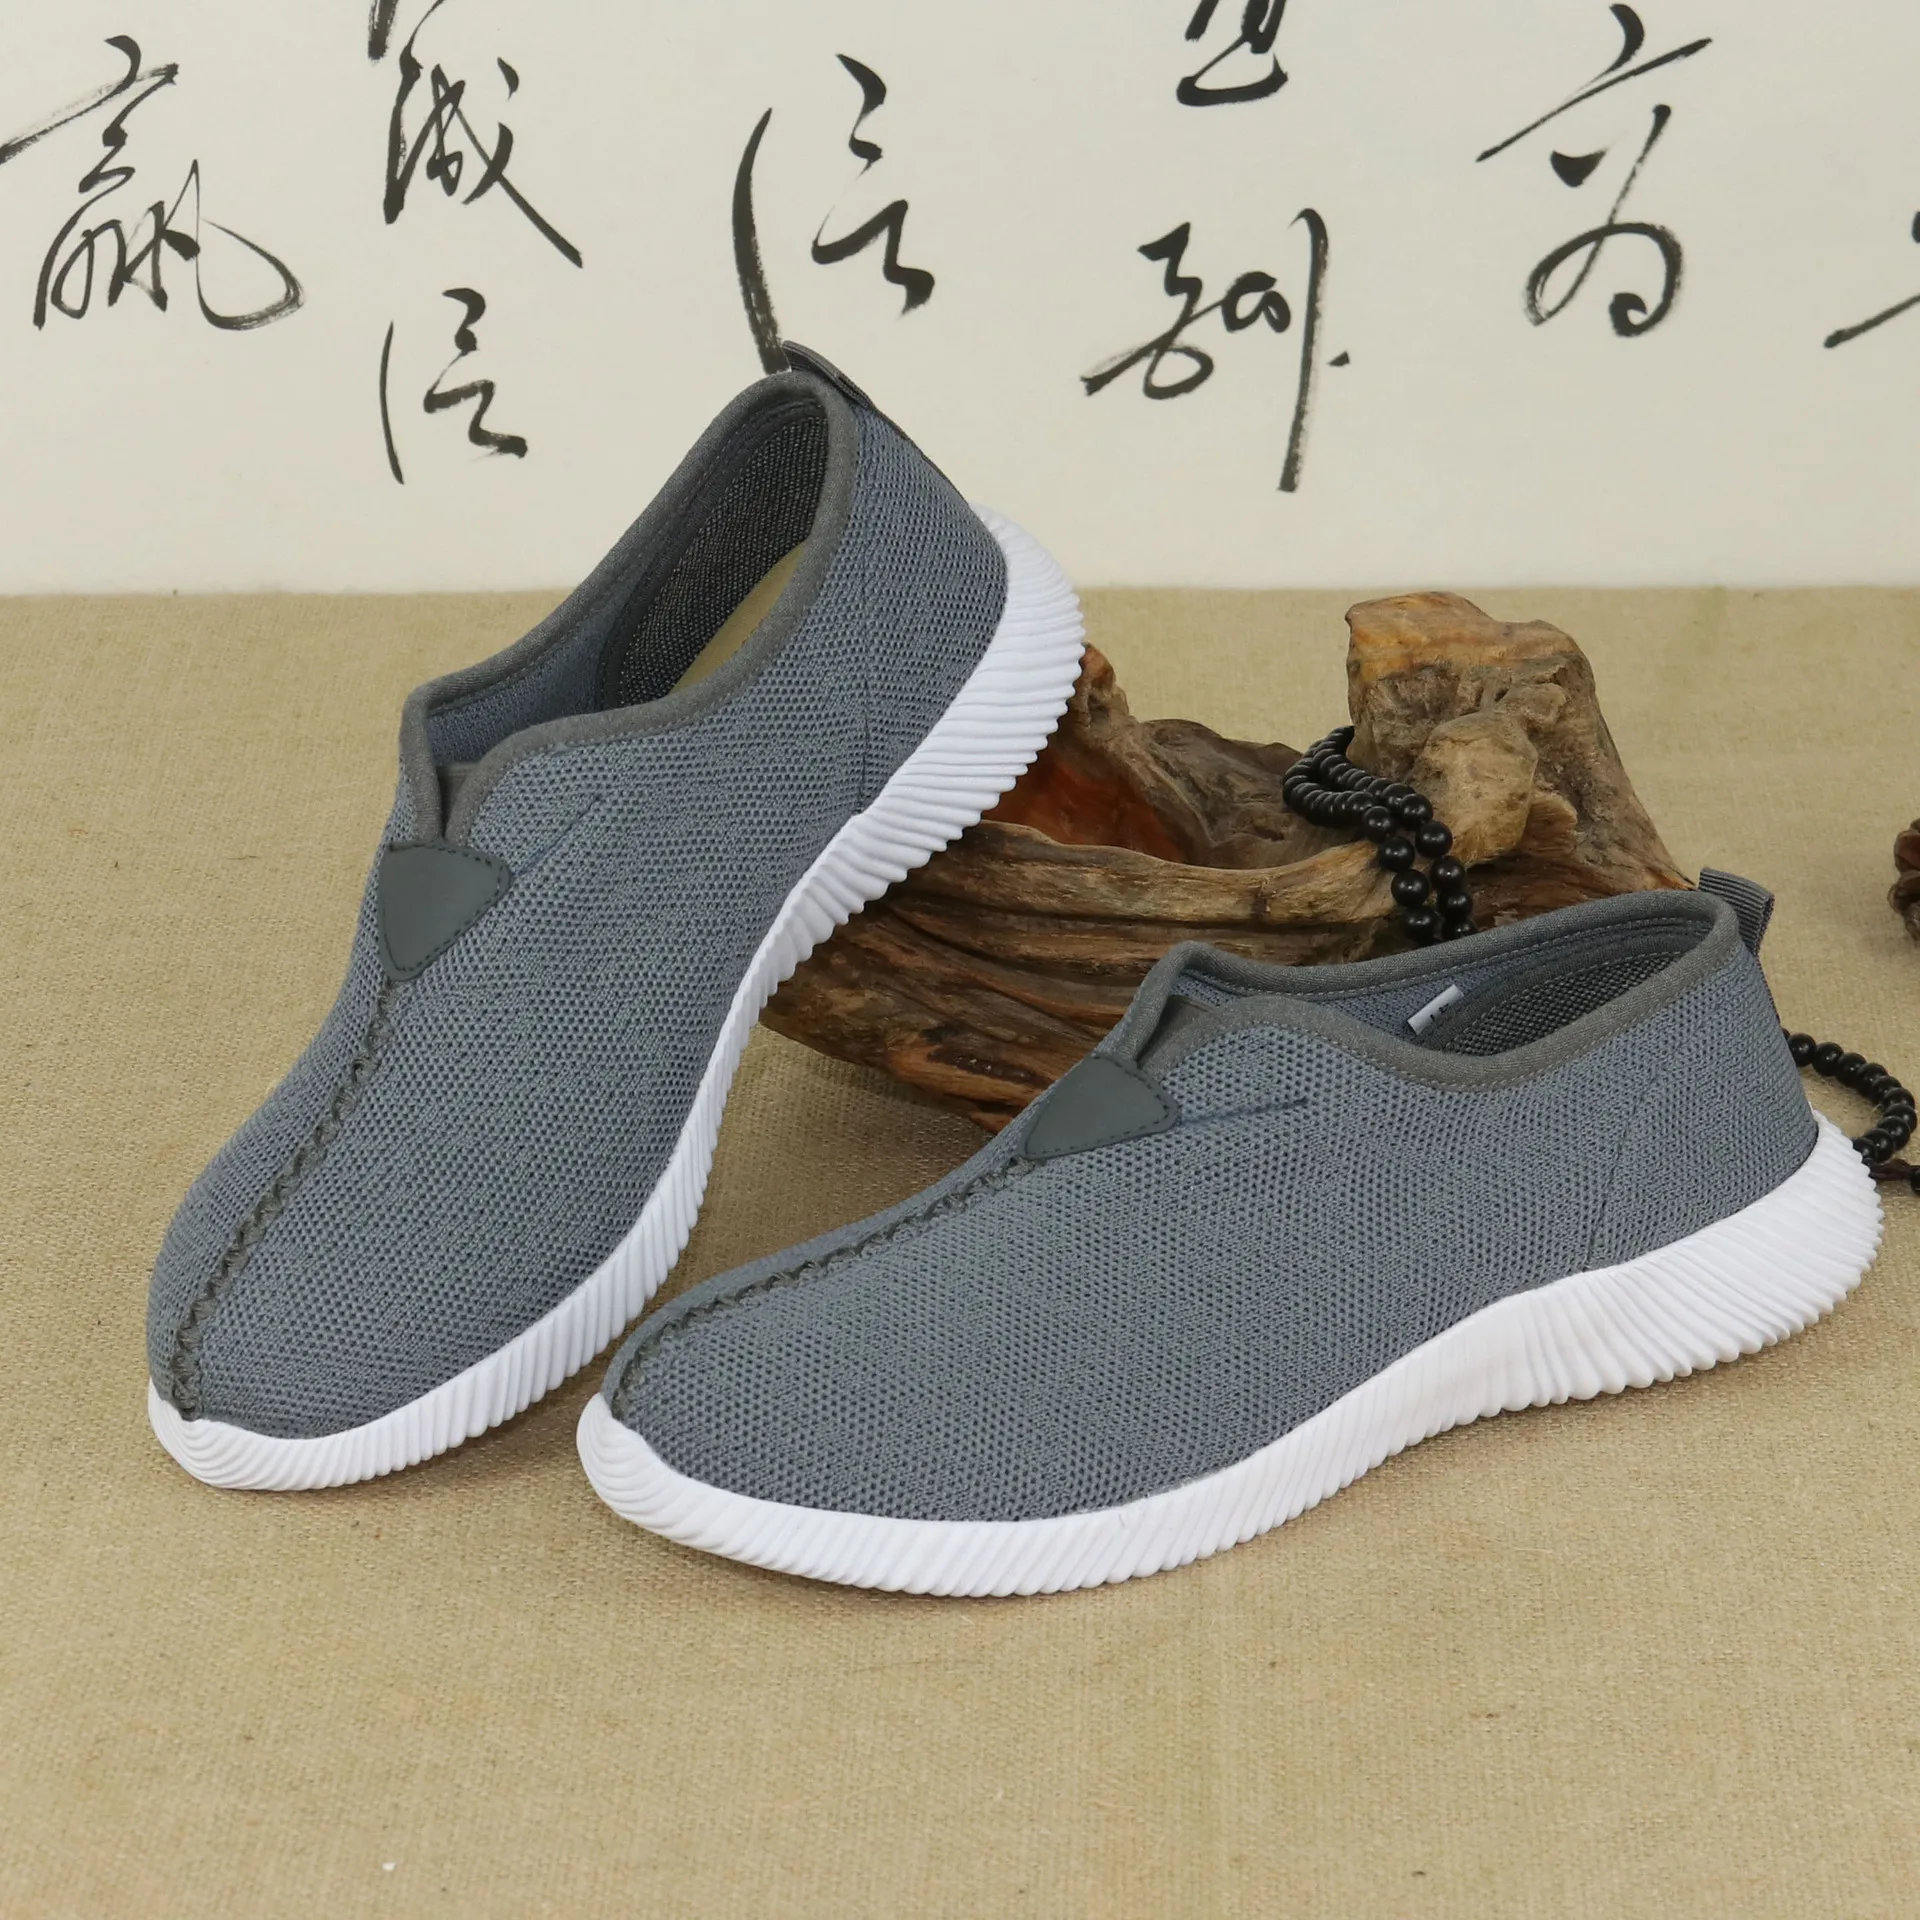 Chaussures d'arts martiaux traditionnels chinois, chaussures décontractées  de Kung Fu, Wing Chun Tai, chapelle Wushu